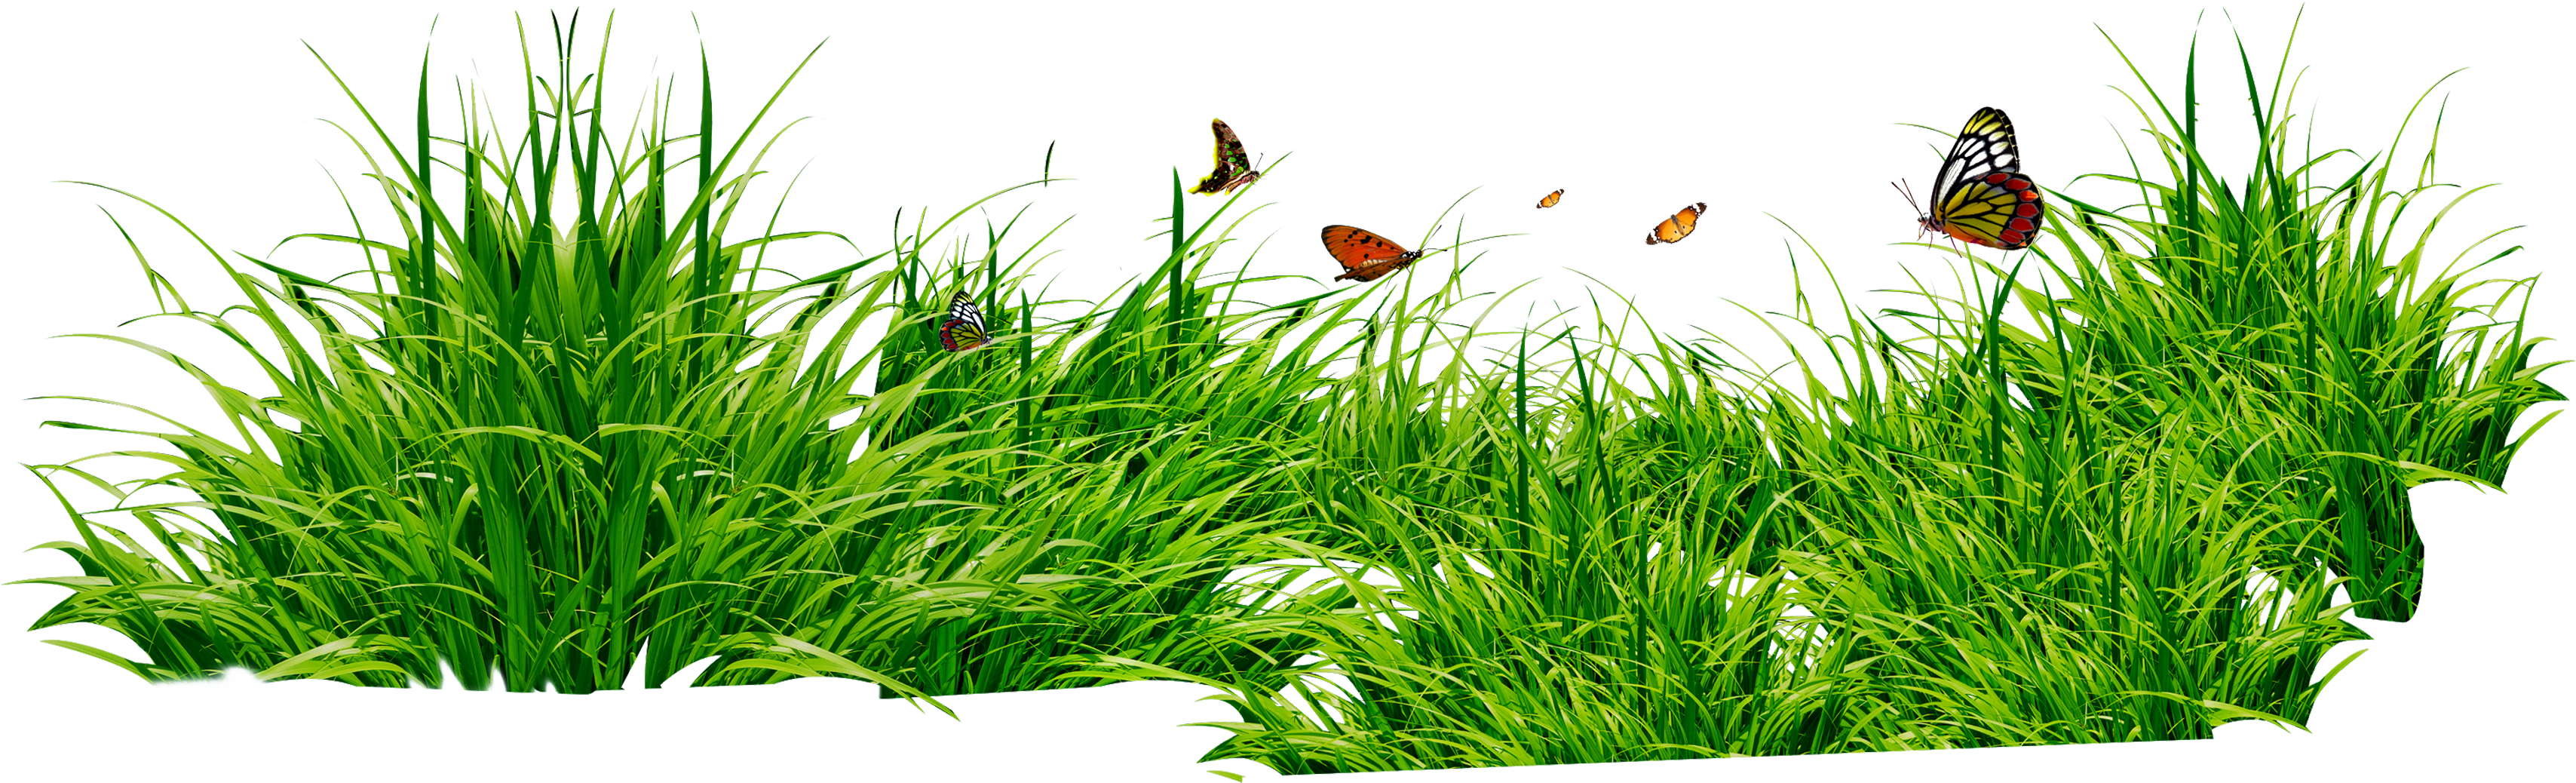 Grass Field PNG High-Quality Image